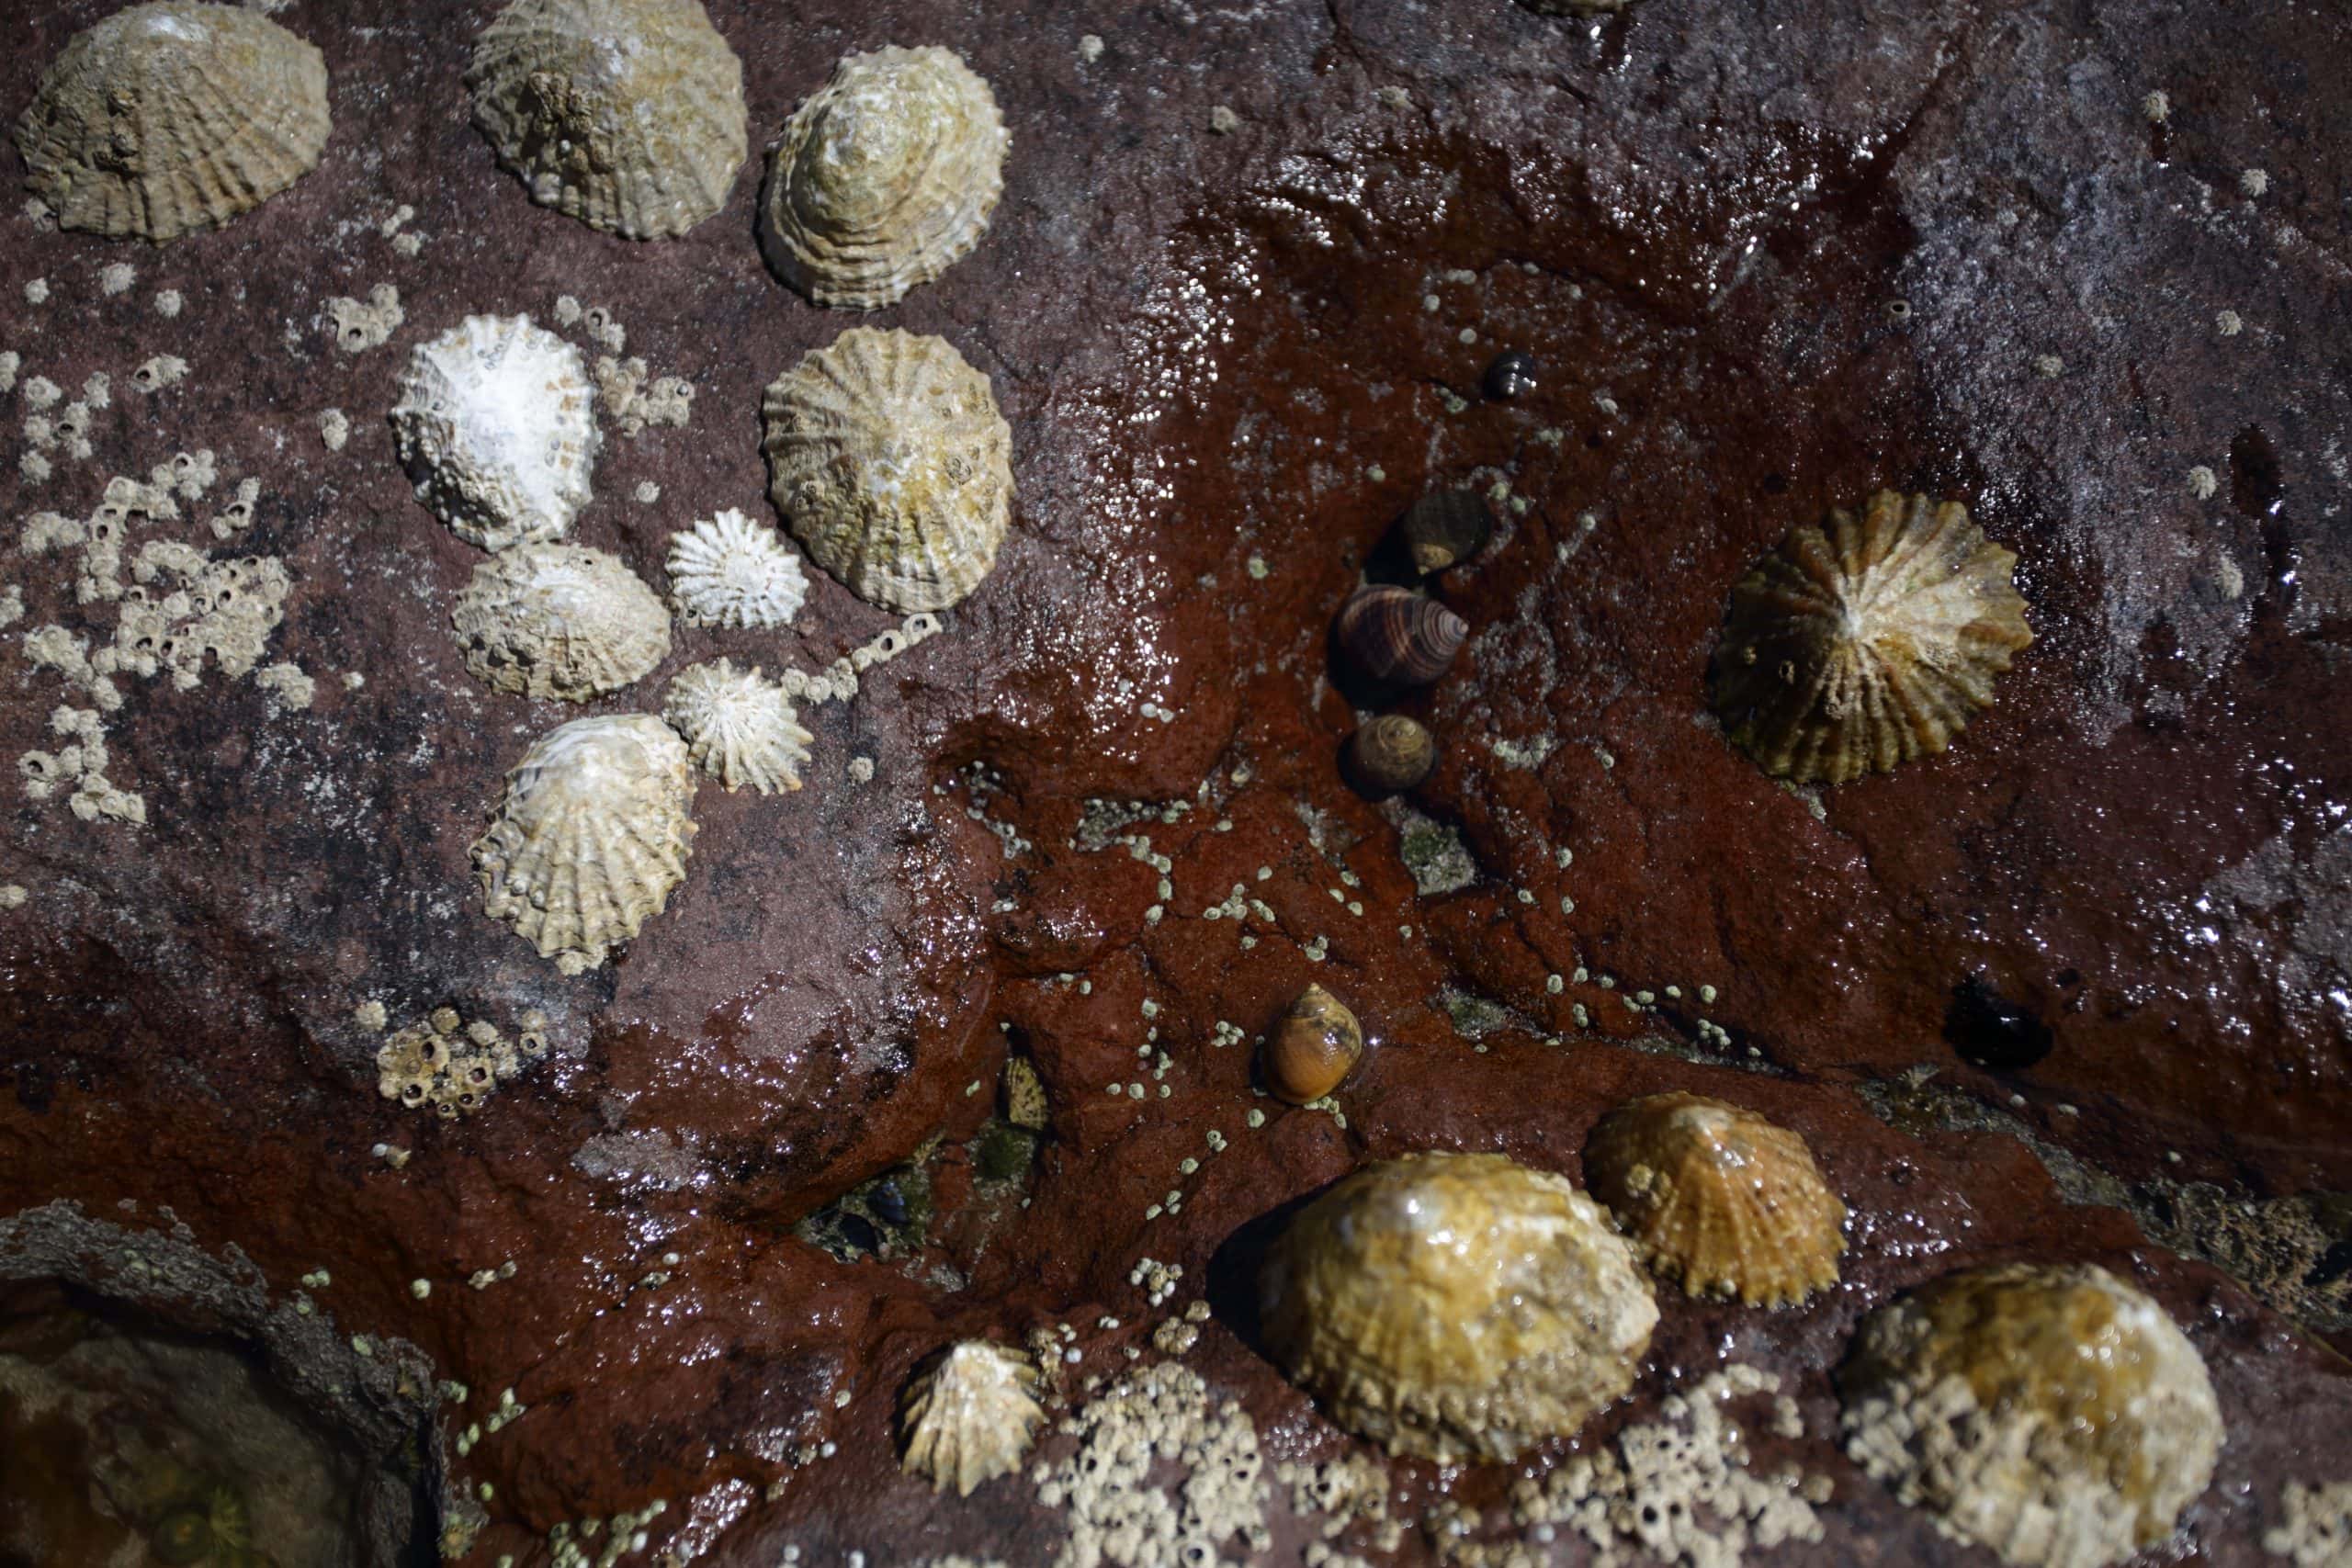 Limpets are incredible aquarium cleaners